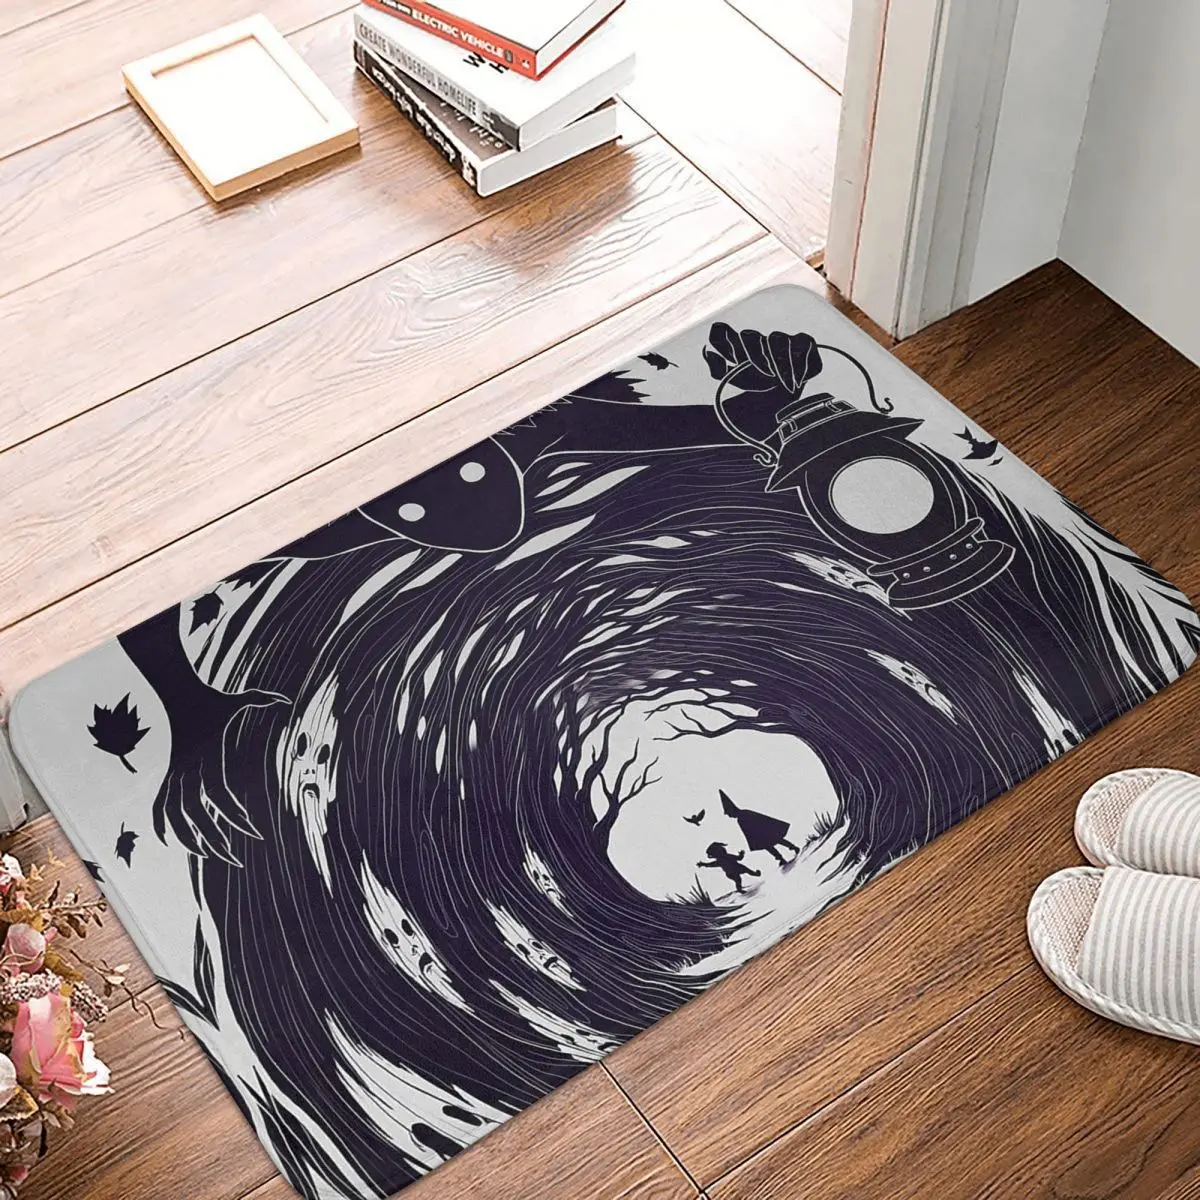 

Bathroom Mat OtGW If You Go Into The Woods At Night Doormat Living Room Carpet Balcony Rug Home Decor